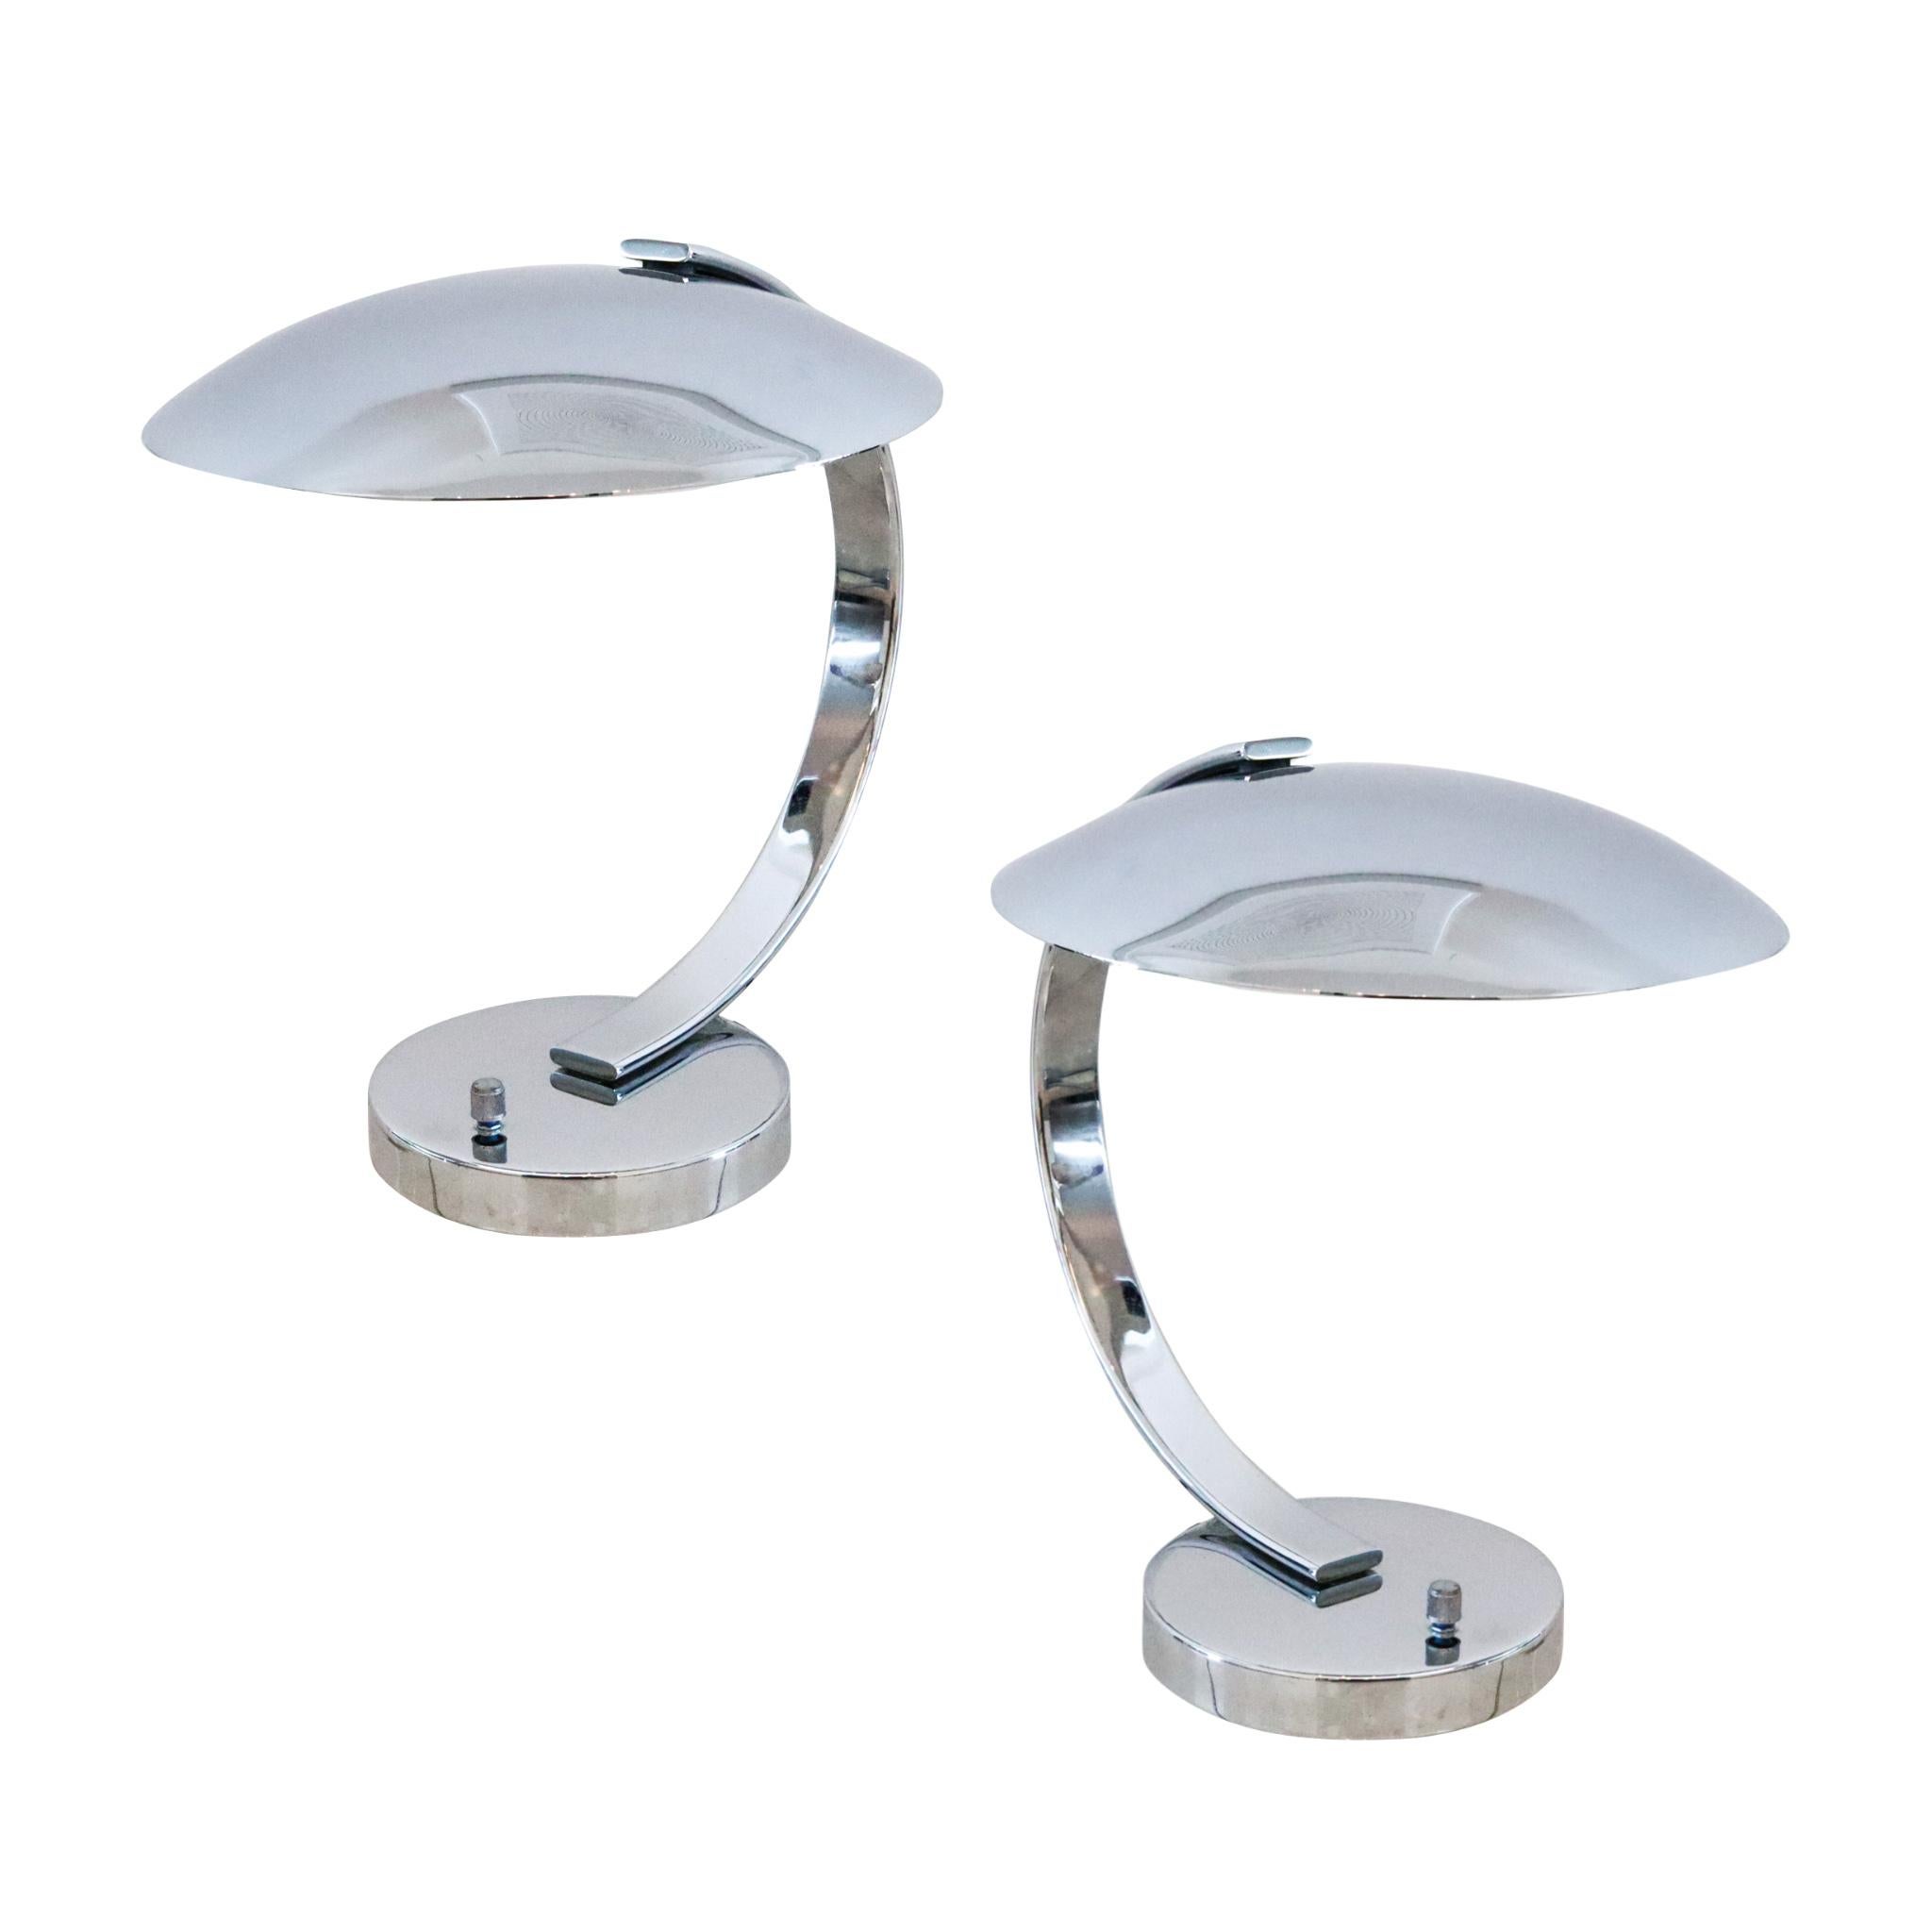 Pair of desk lamps designed by Pierre Disderot.

Beautiful aerodynamic modern pair of desk lamps, created in Paris France by the company of Pierre Disderot, back in the 1980. These are the model 6183, with incorporated light dimmer and crafted in